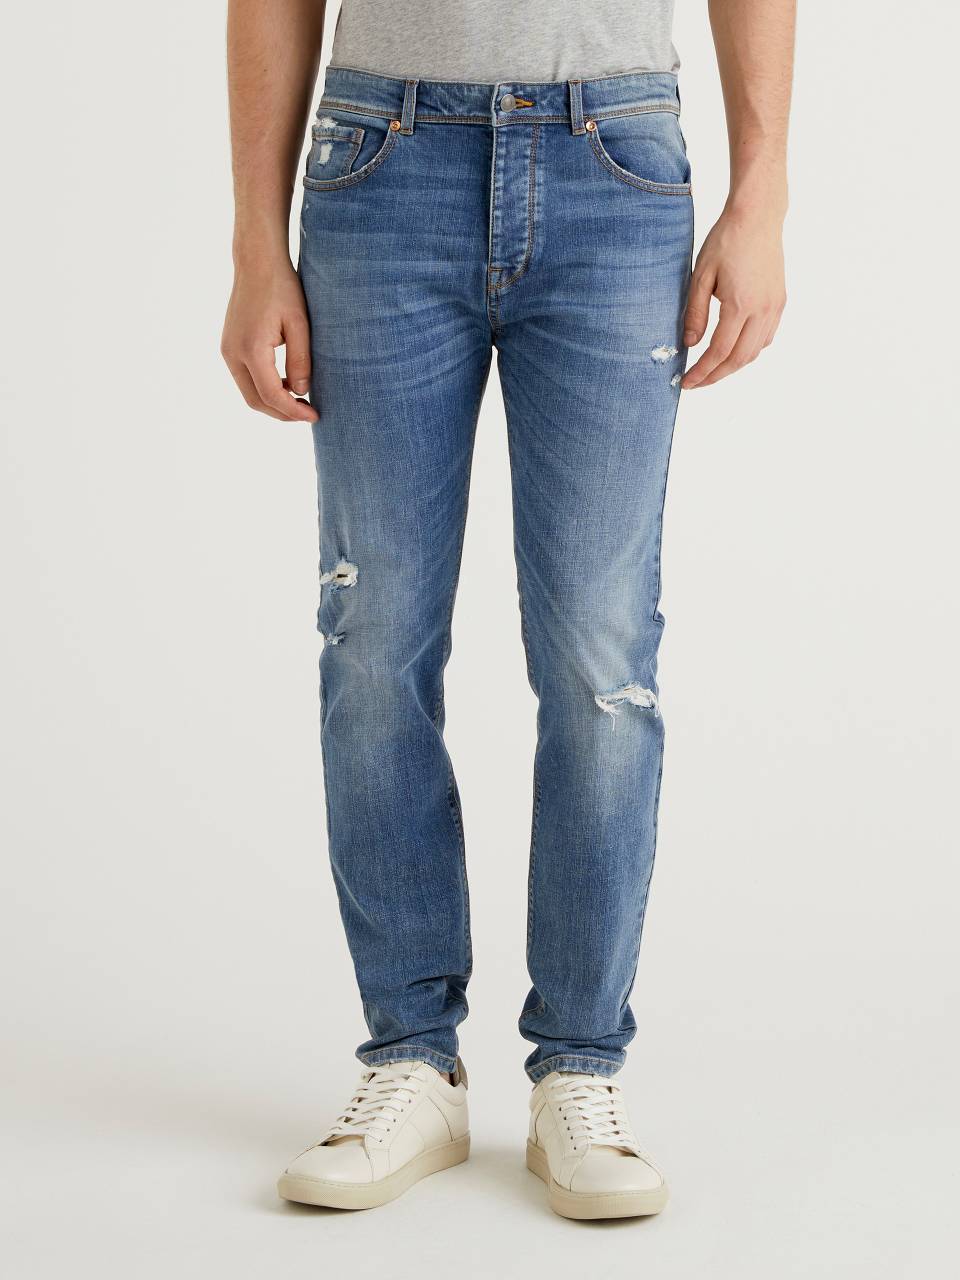 Benetton Jeans coupe skinny. 1